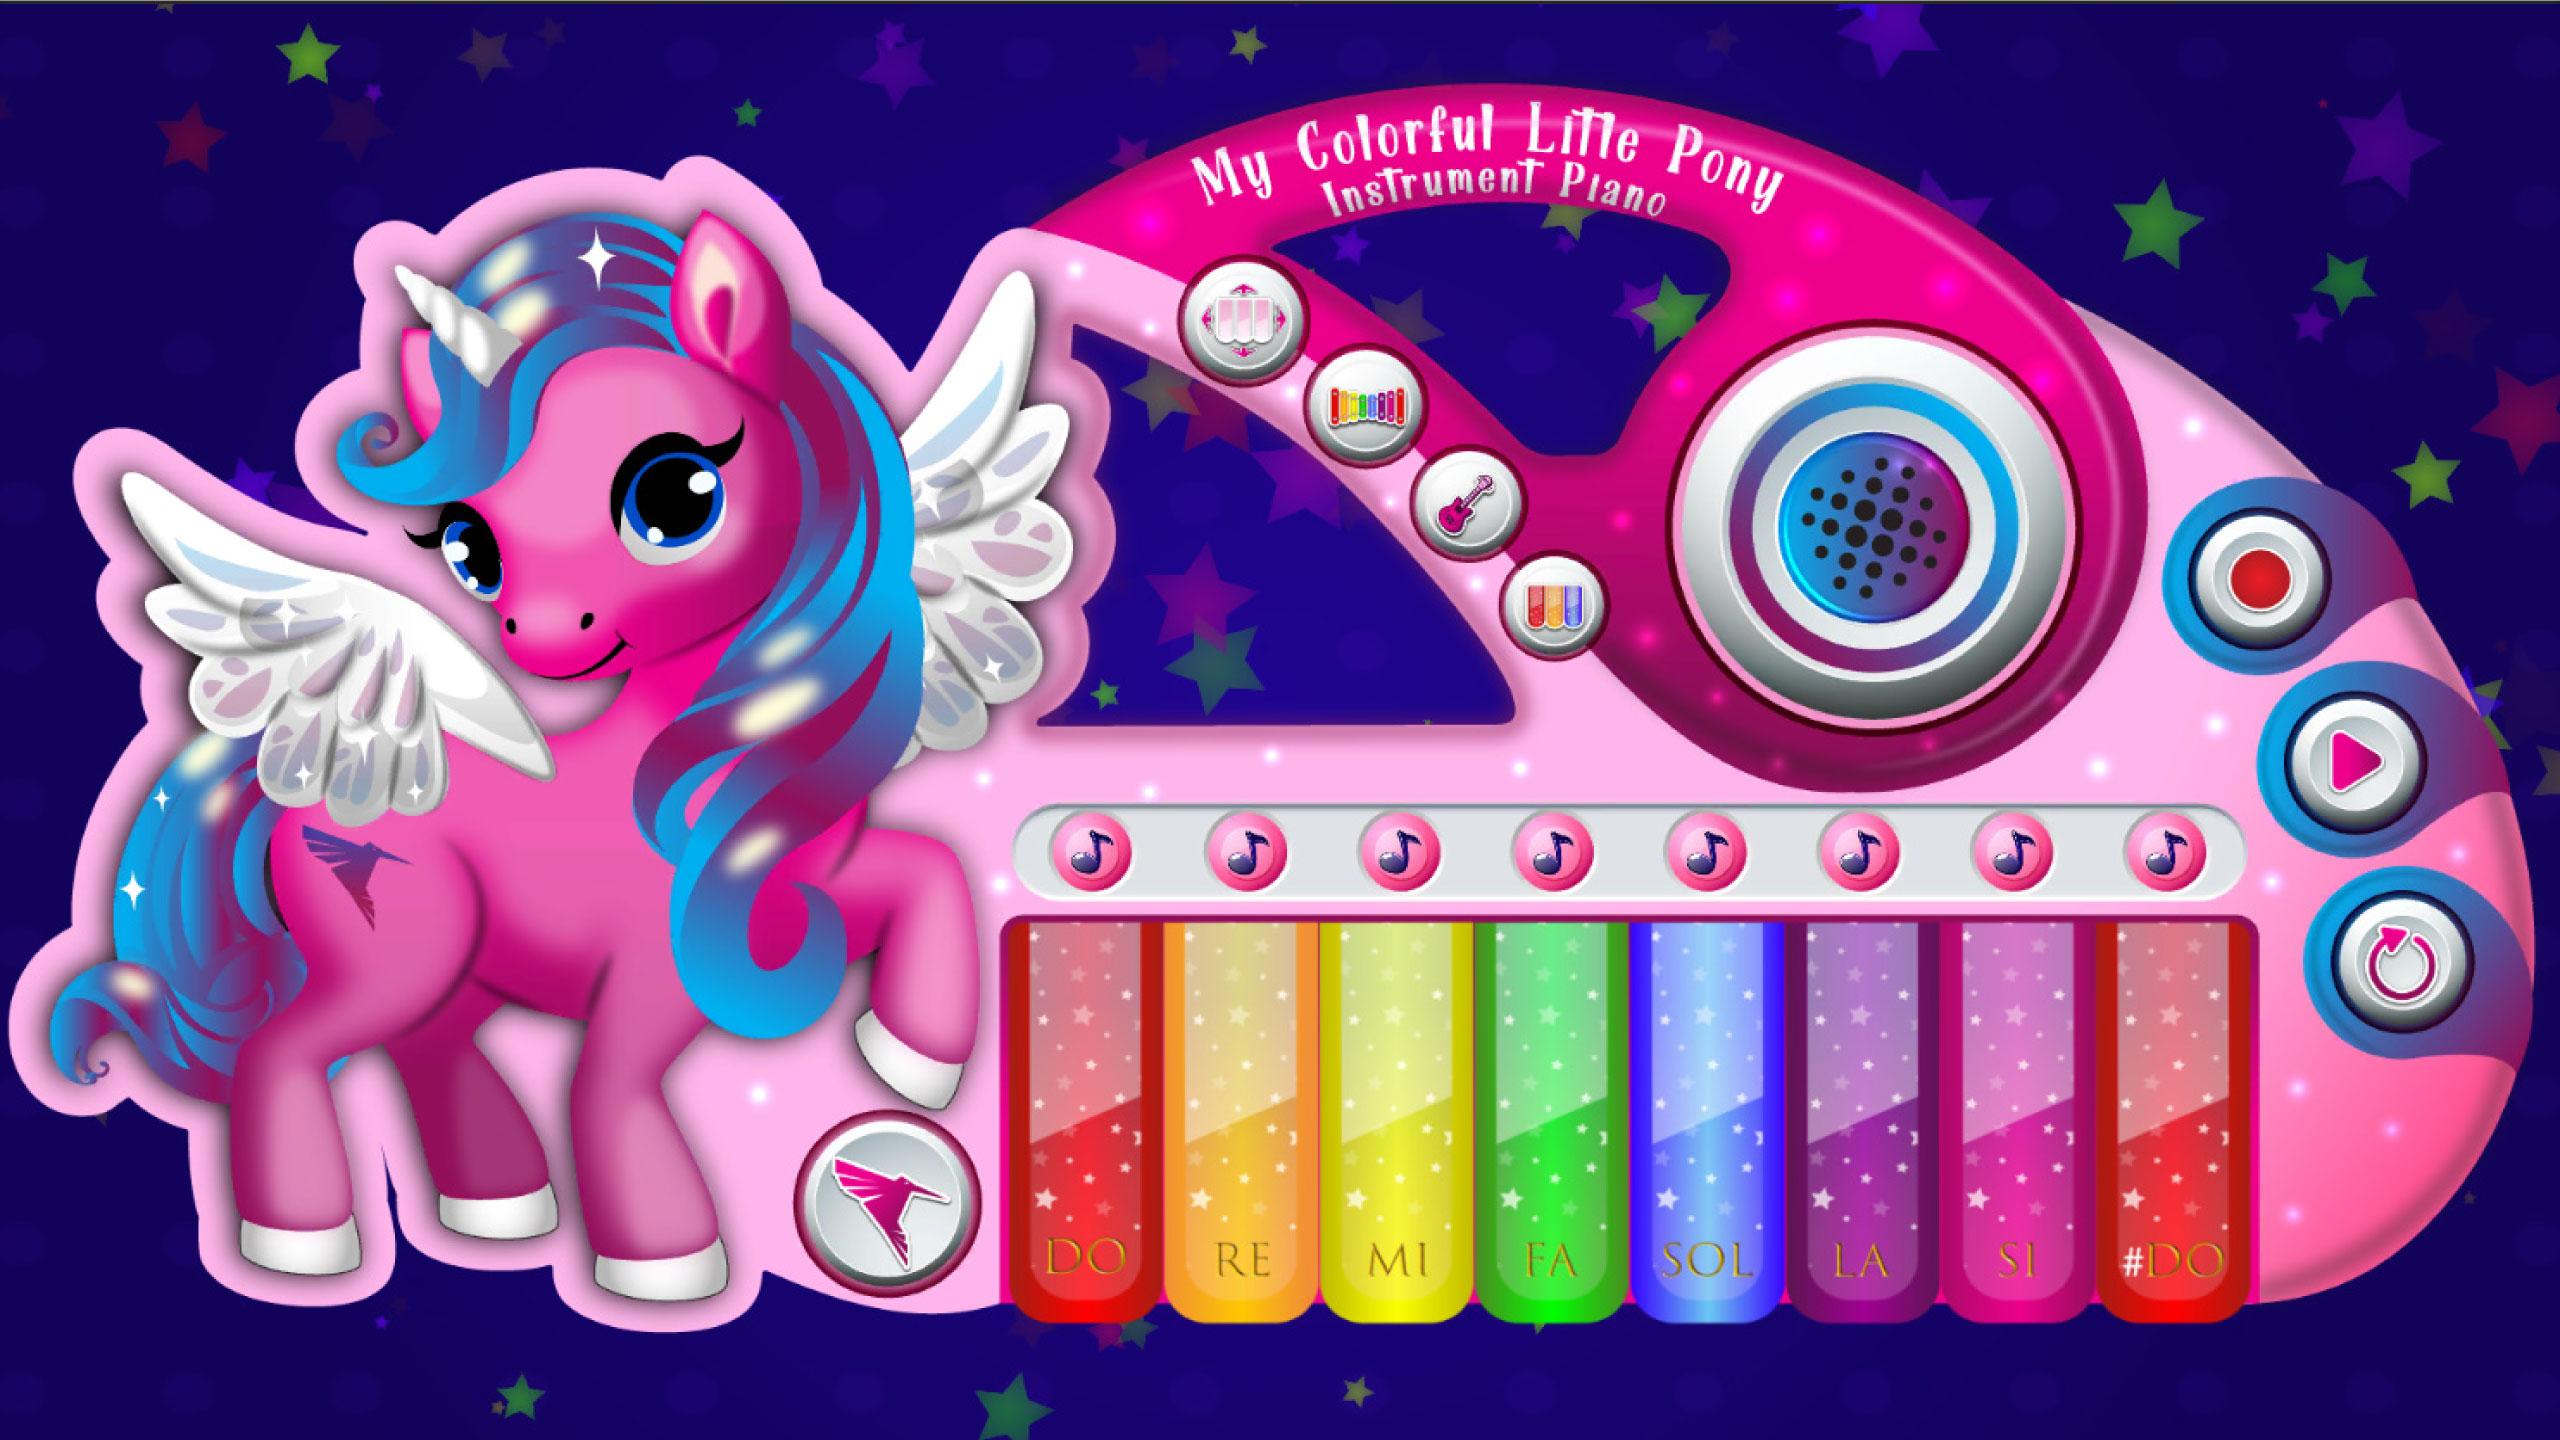 My Colorful Litle Pony Instrument - Piano 2.0 Screenshot 5